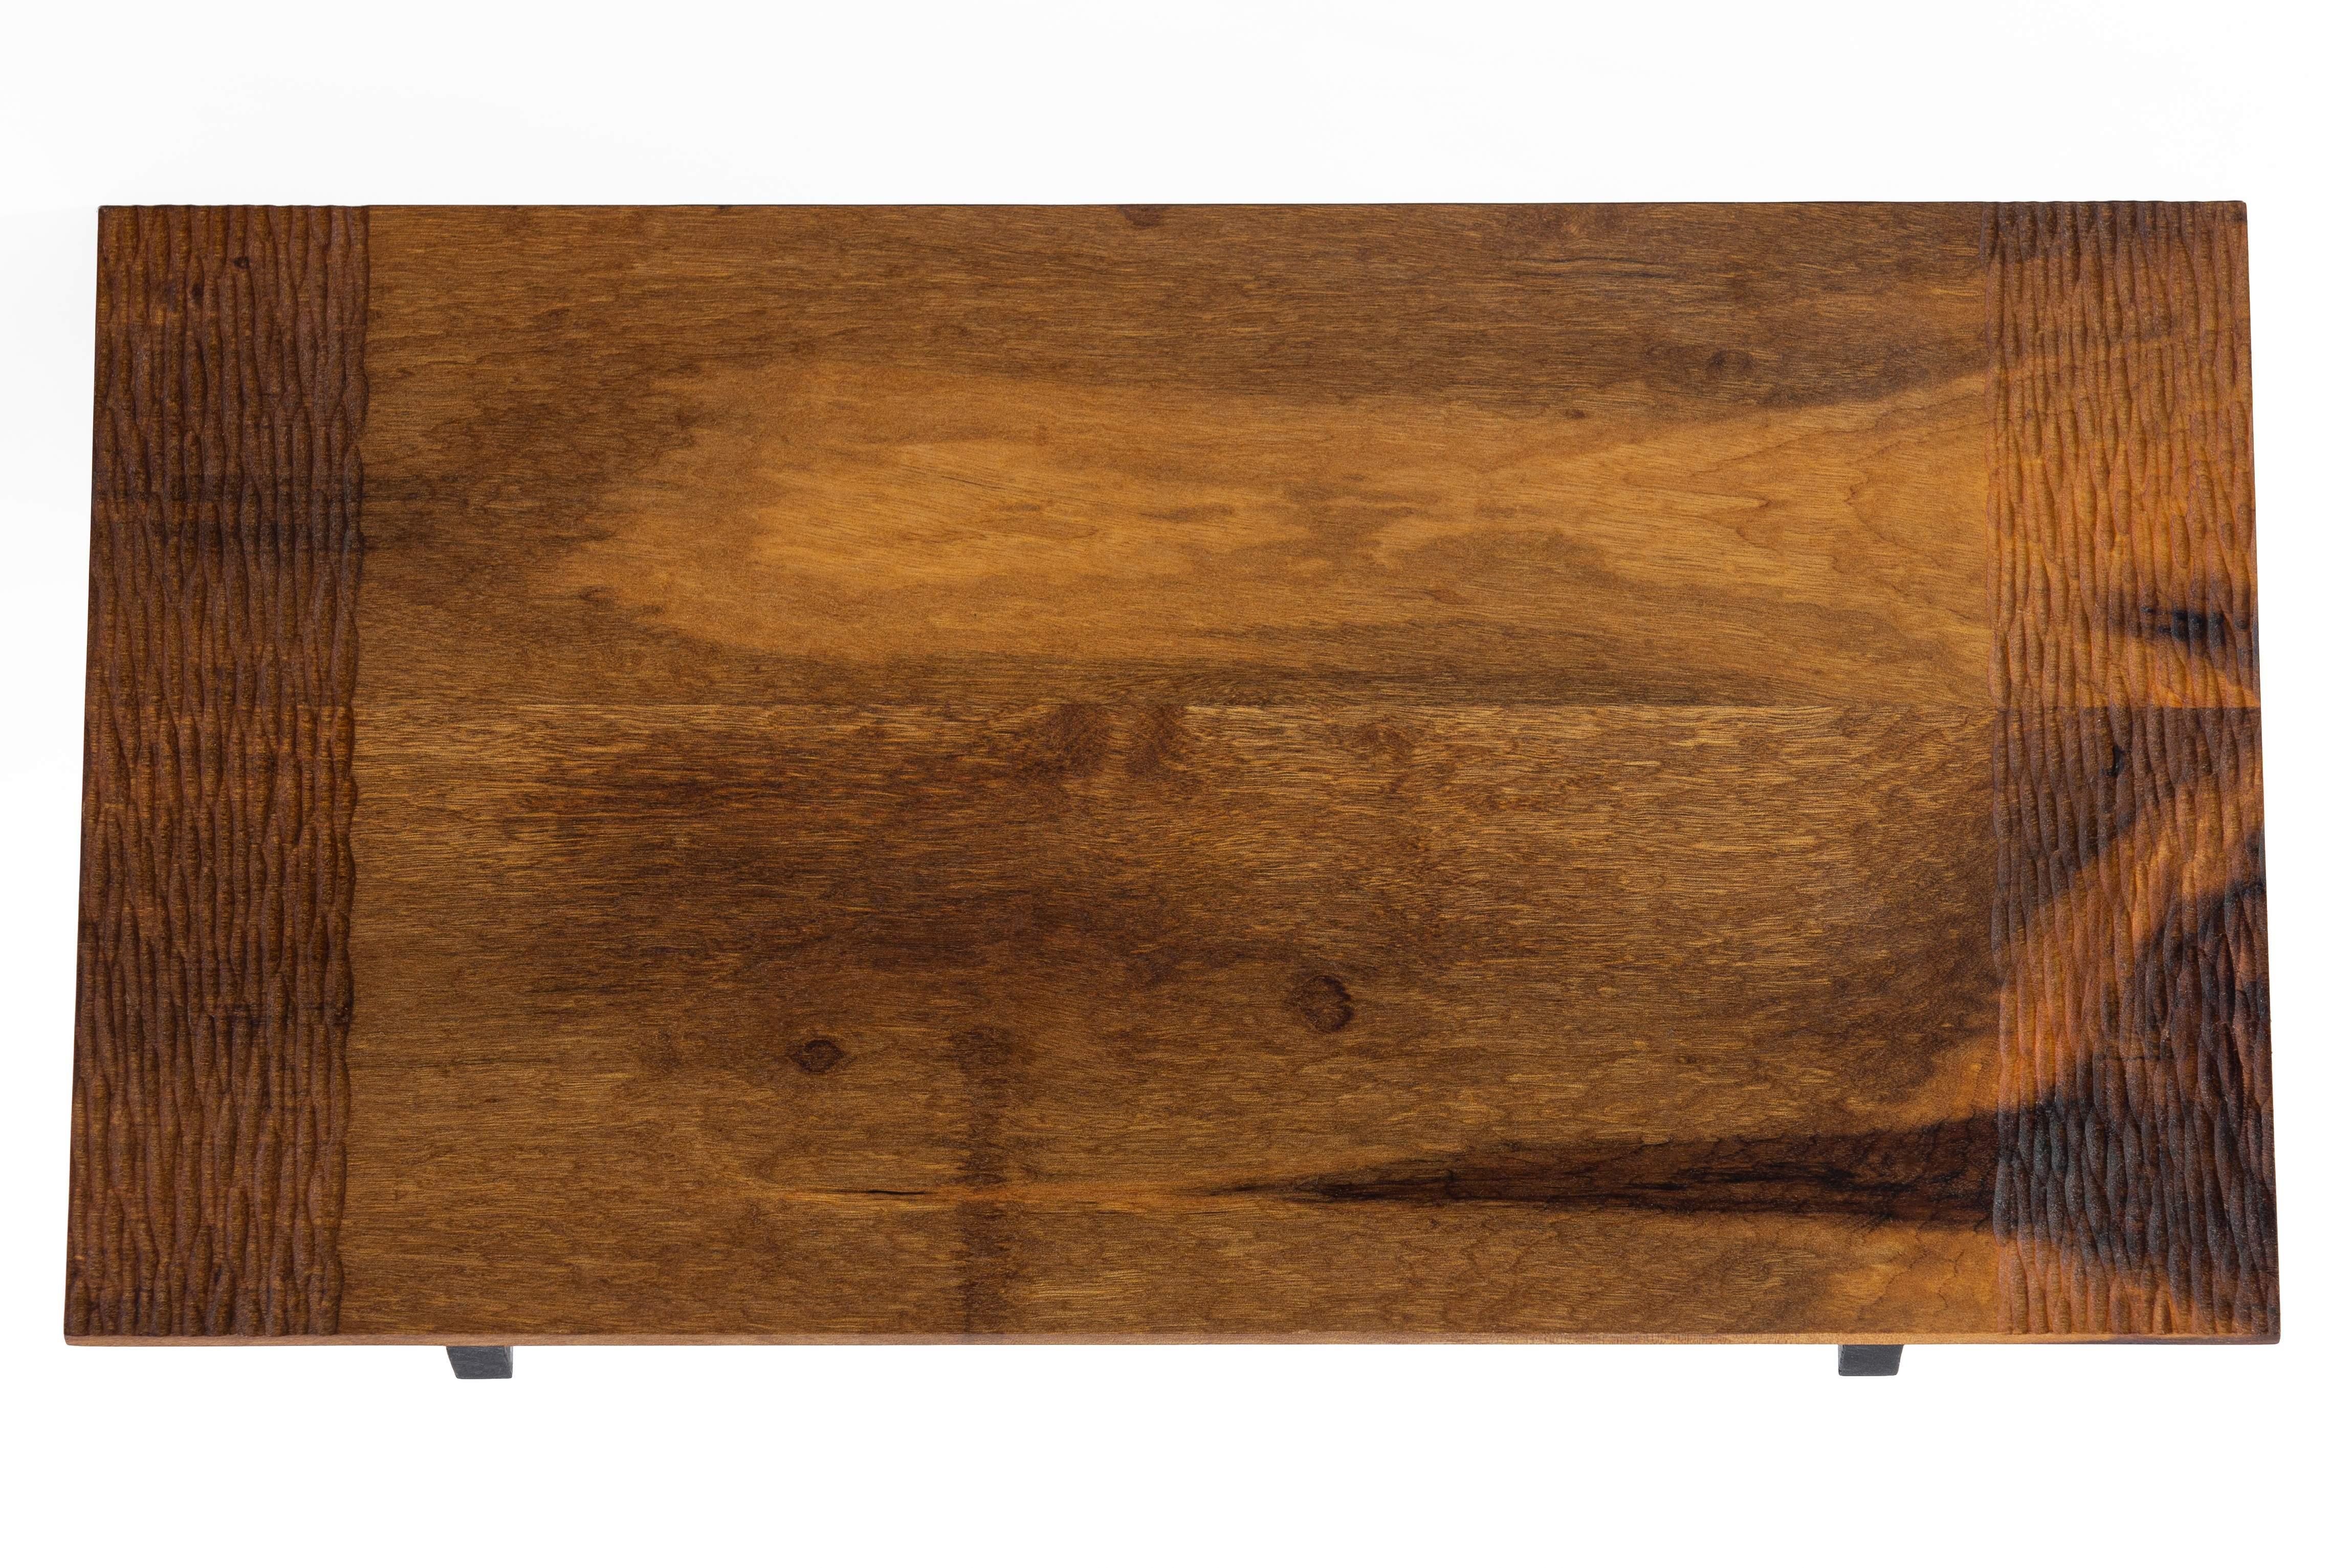 The Mundaú tray, made of Imbuia wood, is an excellent choice to place on top of a sideboard or buffet, in that cozy coffee corner, or to serve whatever you desire.

A finely crafted piece, it was developed with handmade joinery and intricate